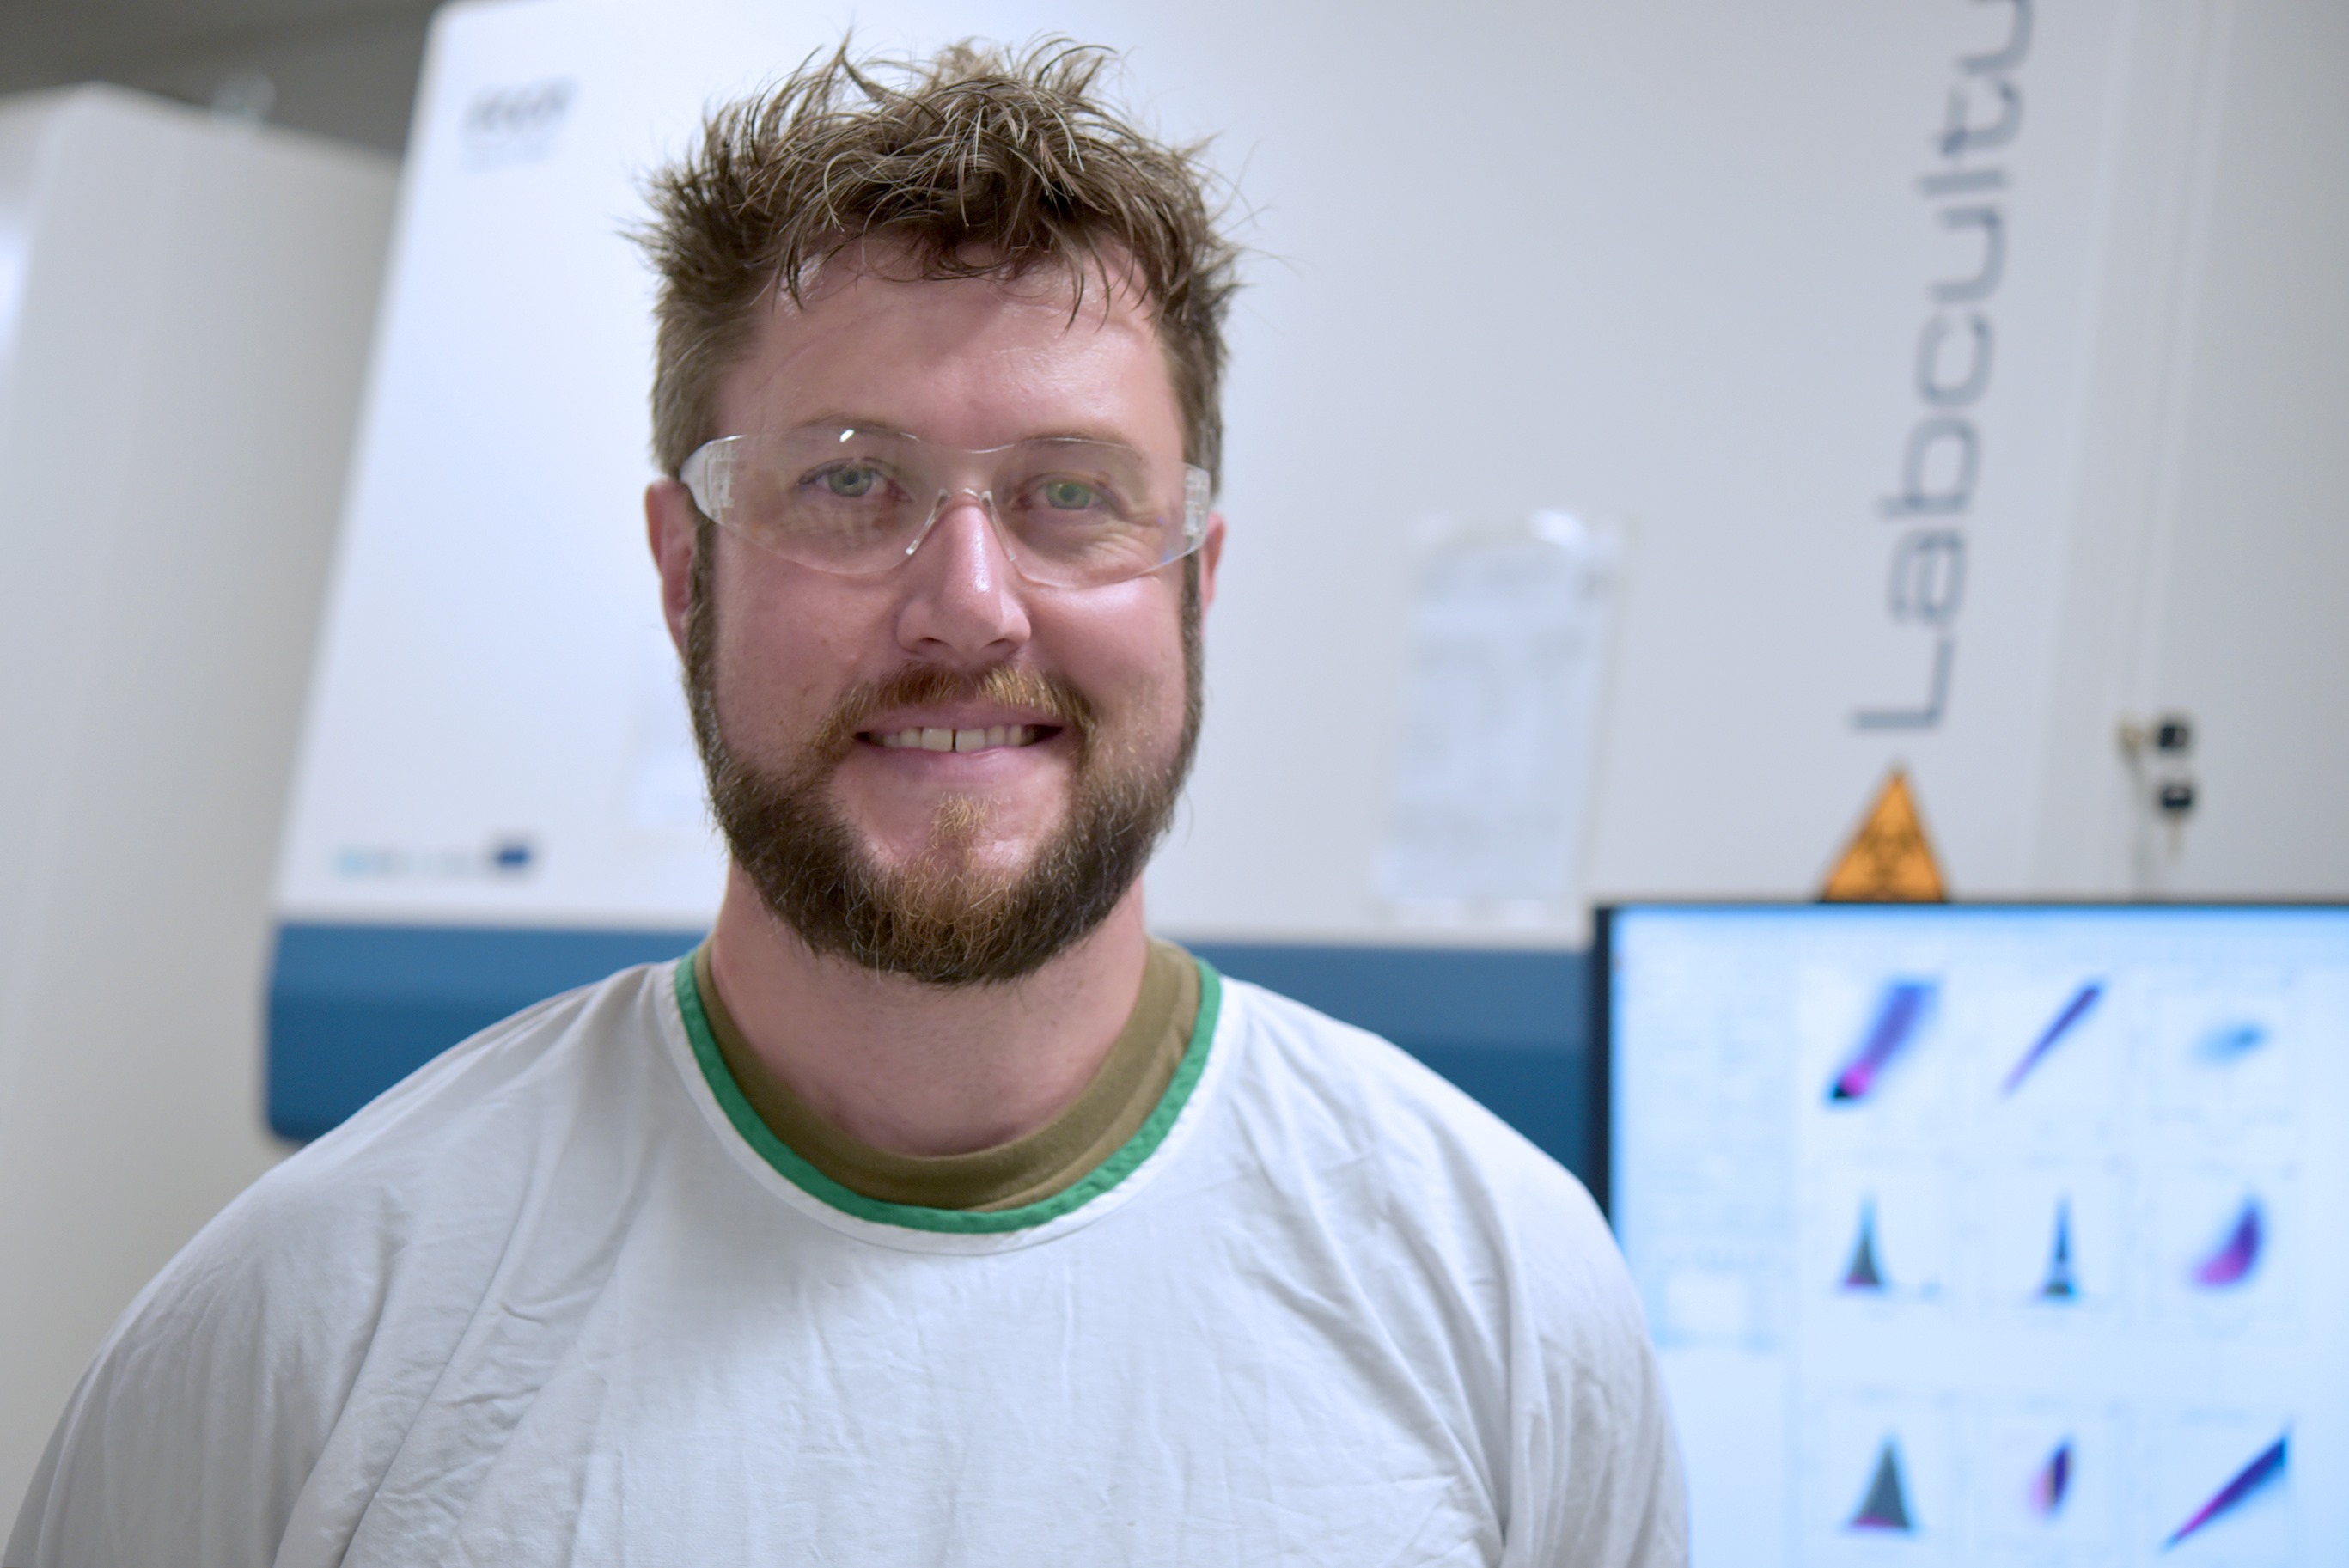 An Advance Queensland Industry Research Fellowship win for Dr Nicholas Fletcher will allow him and his team at the AIBN’s Centre for Advanced Imaging to examine these ‘holy grail’ treatments, with crucial input from their Industry Partner AdvanCell.